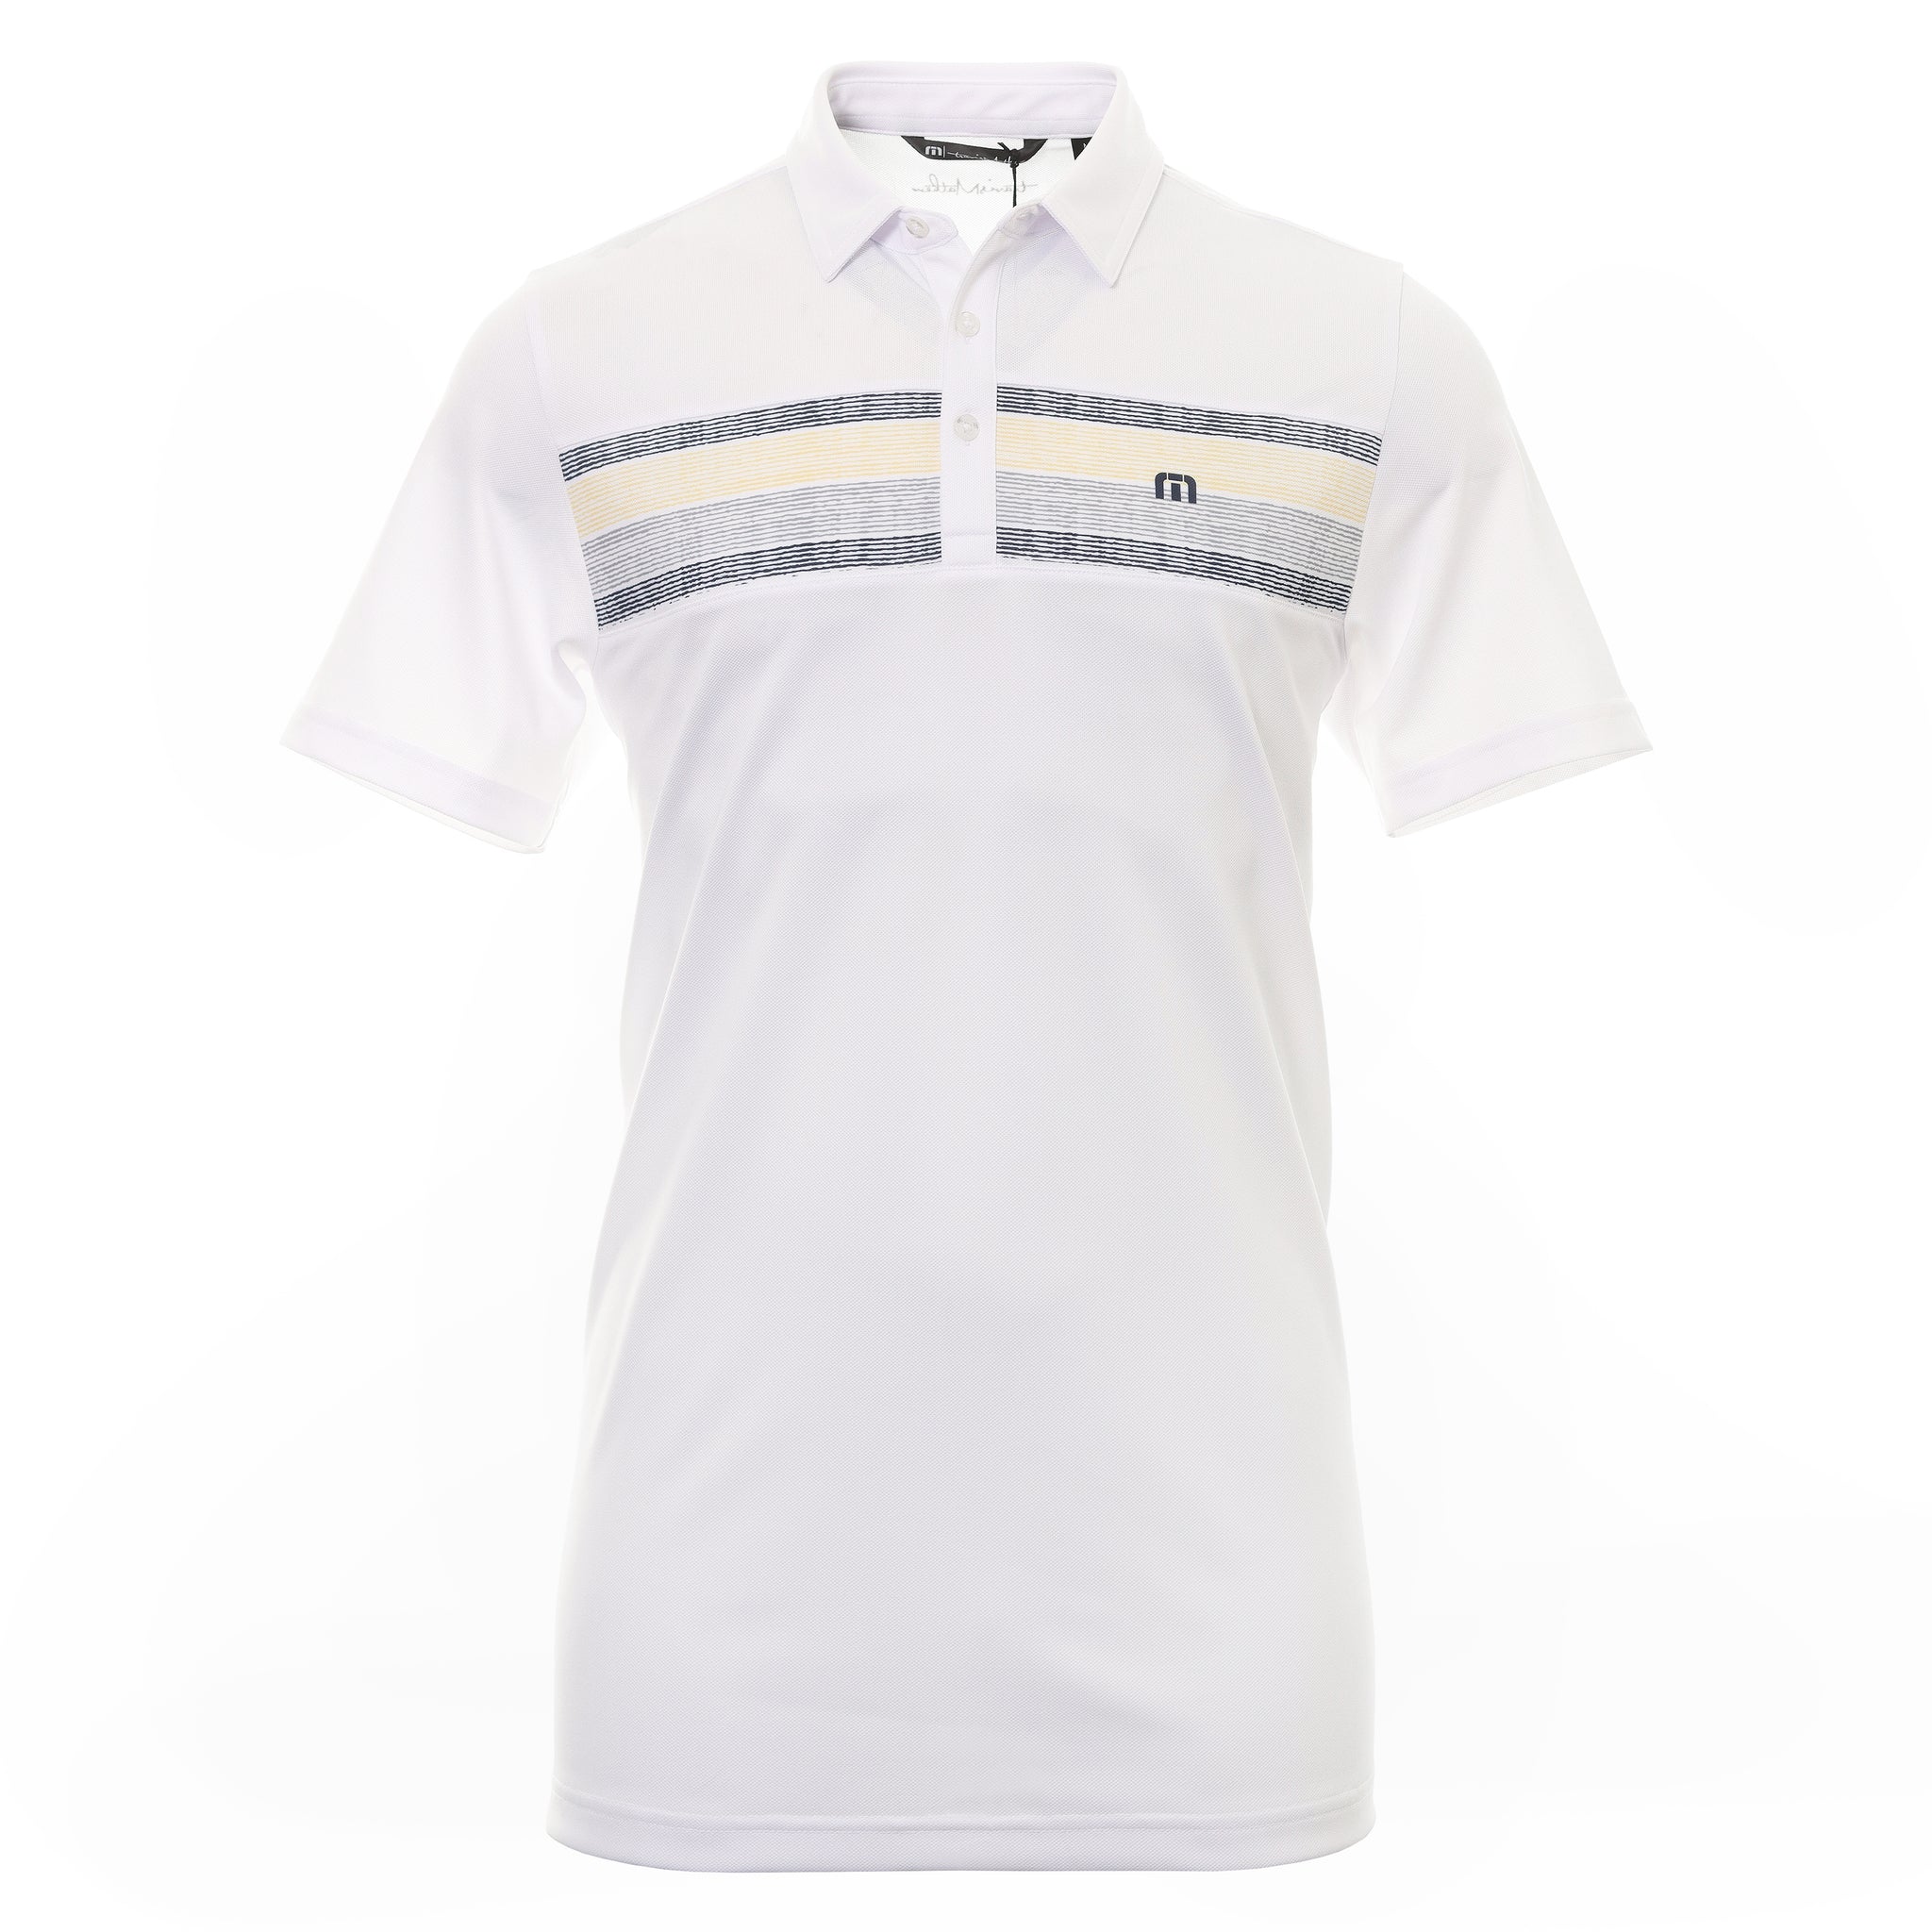 TravisMathew Los Cabos Polo Shirt 1MY132 White & Function18 | Restrictedgs